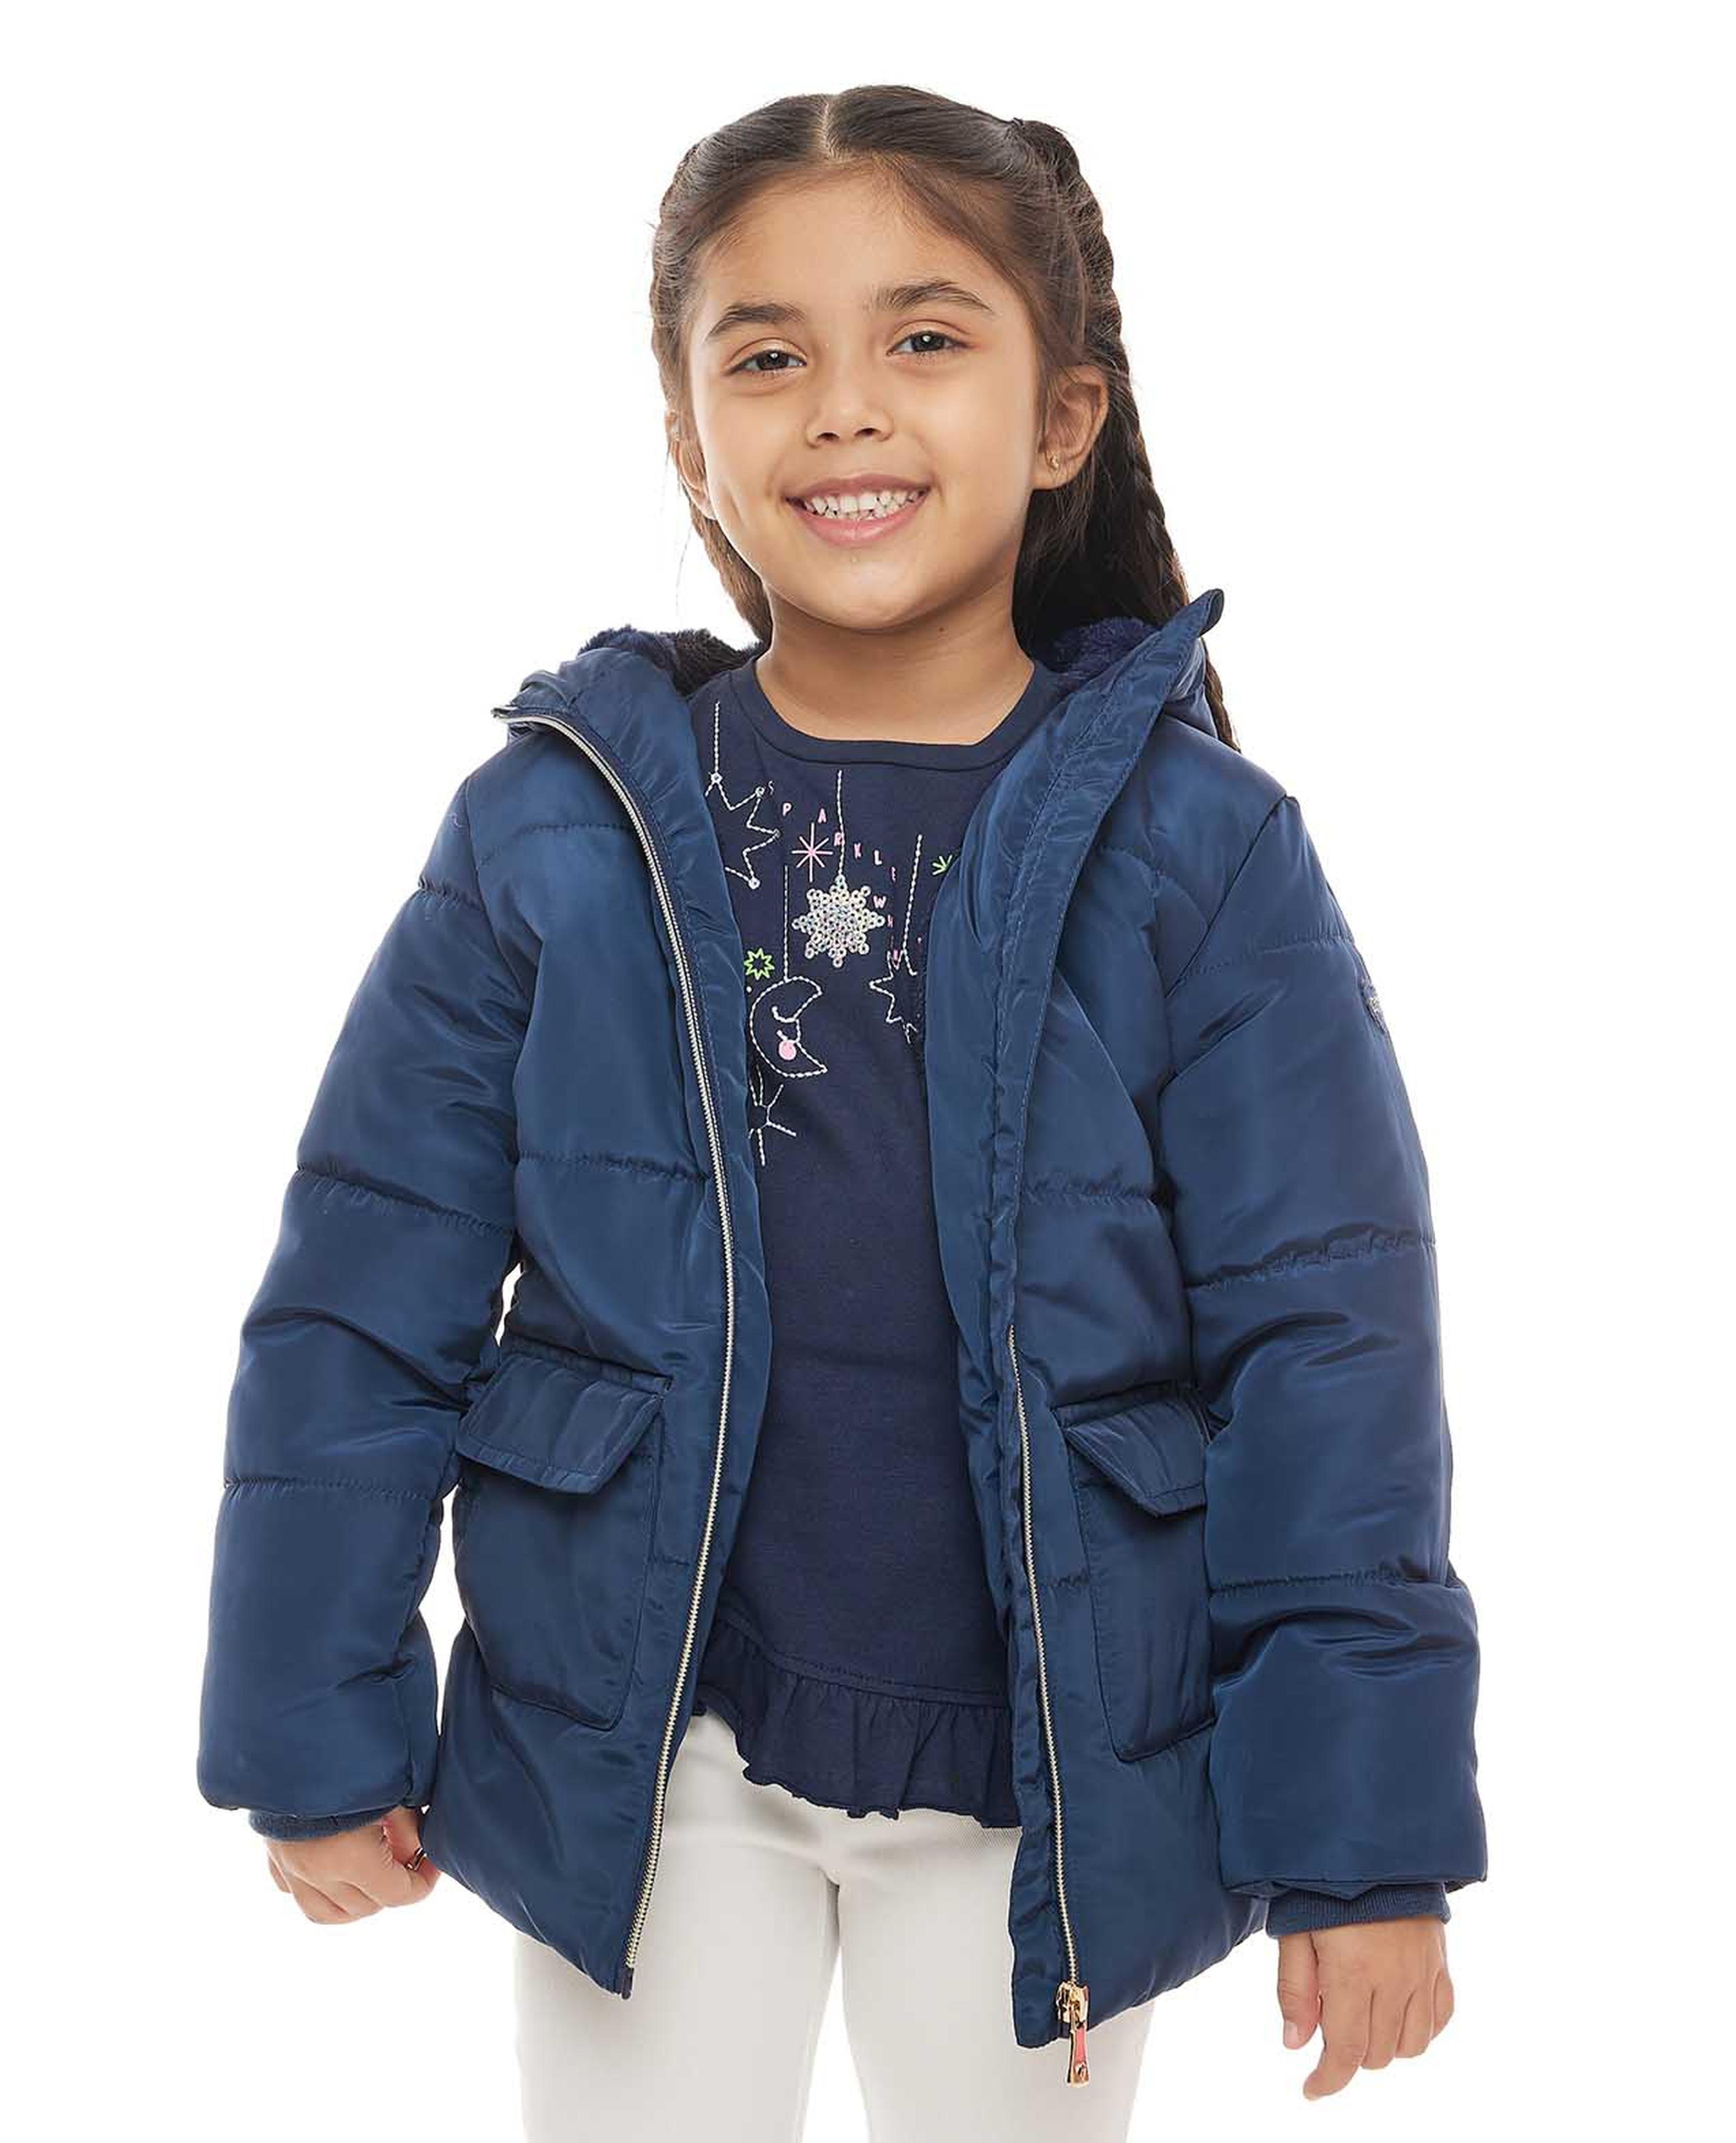 Solid Hooded Puffer Jacket with Zipper Front